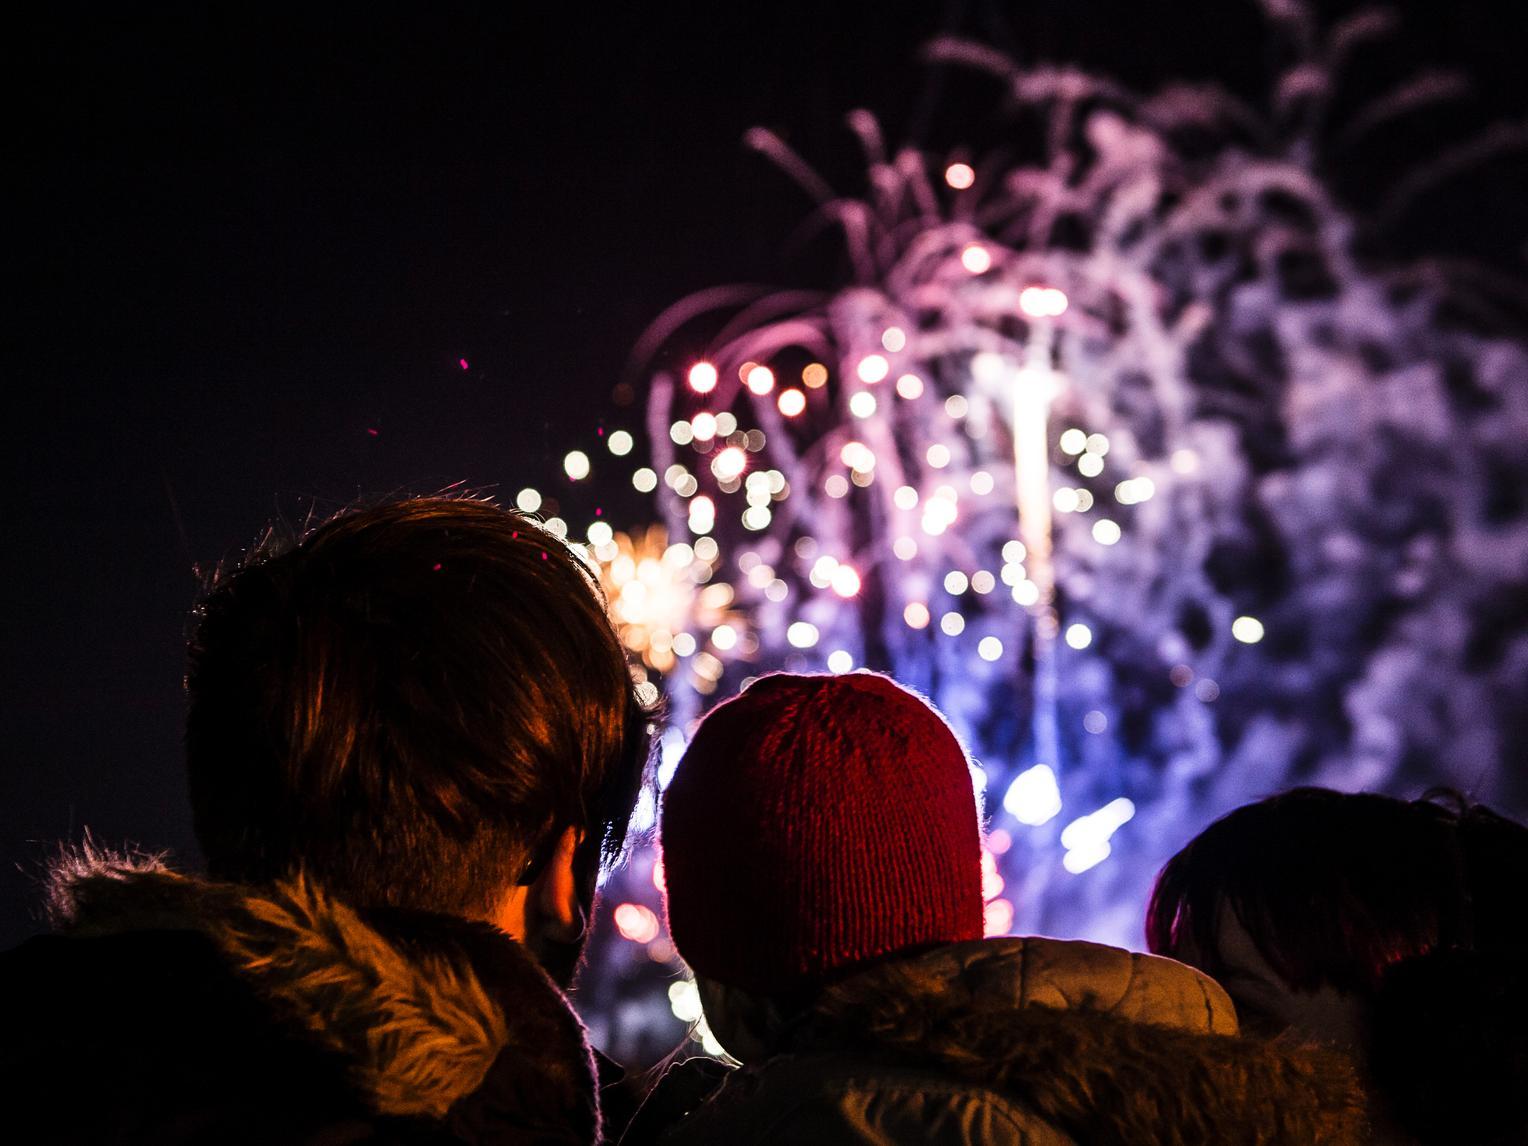 Held on Tuesday, November 5 at 6pm. The fireworks will be choreographed to music around the school's natural amphitheatre site. Food, alcohol and soft drinks on offer. Cost: 8 adults, 6 children, 25 family of four